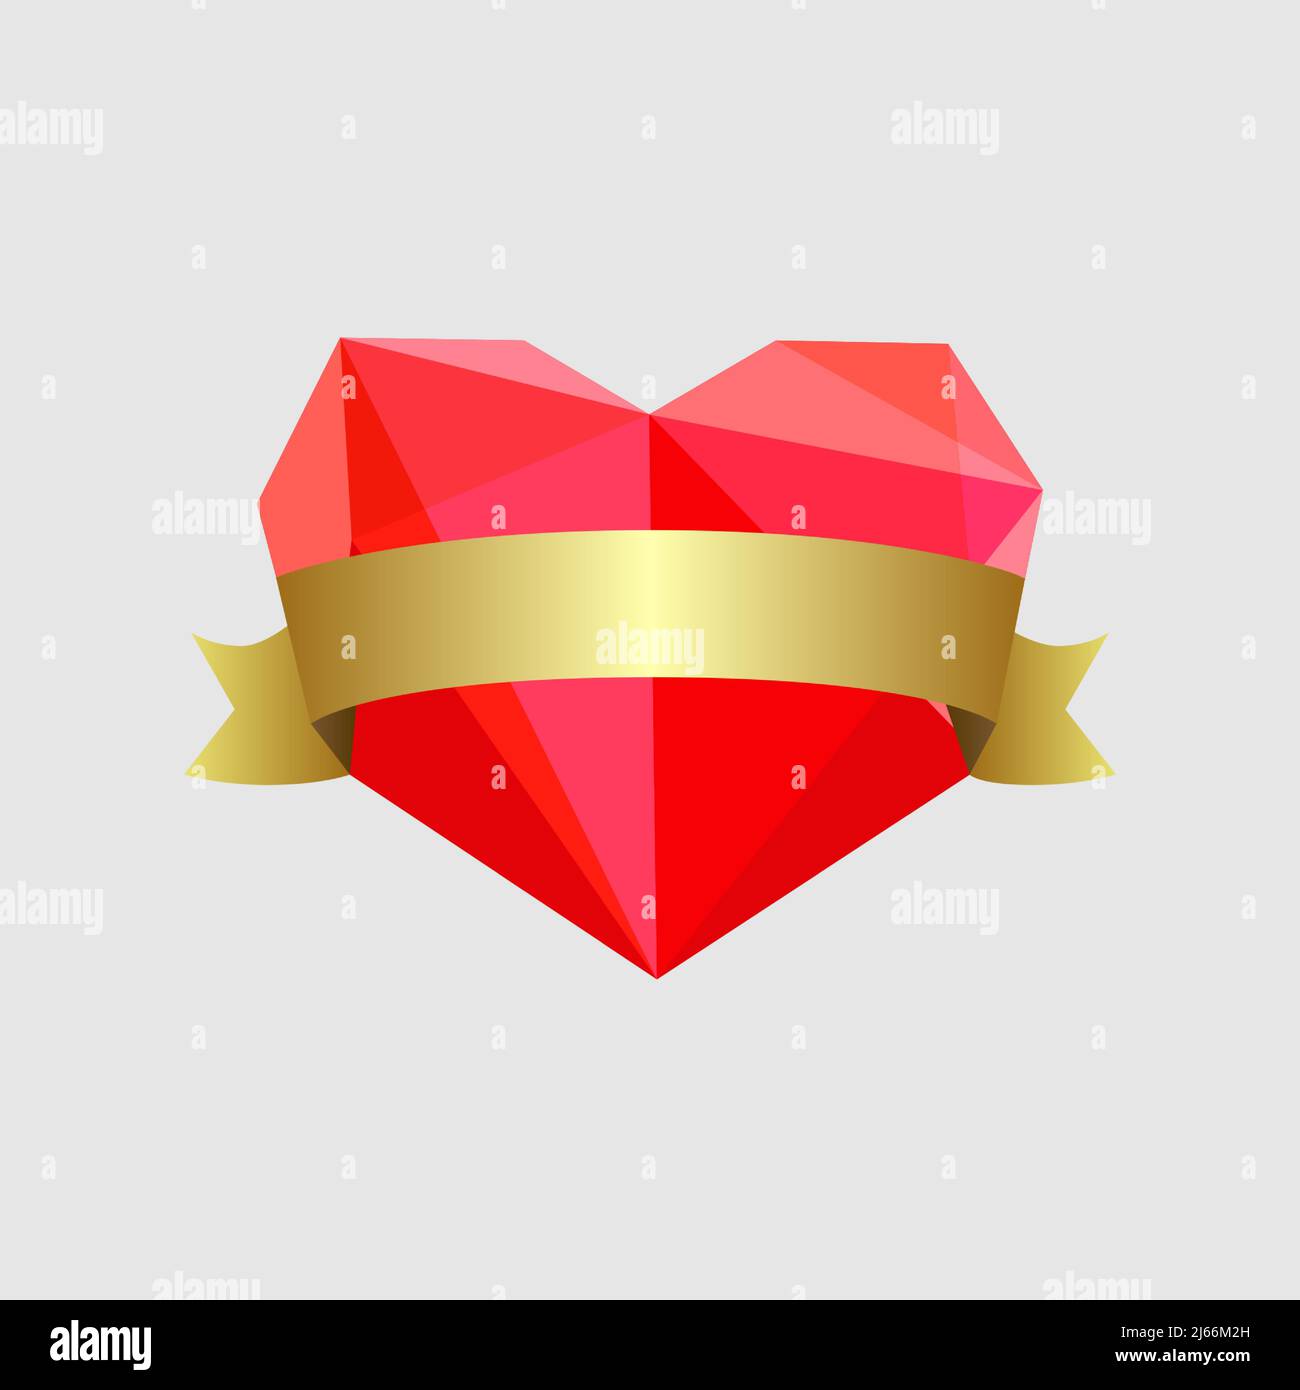 Creative heart icon. Heart lovely stained-glass red colored shape and  shiny gold ribbon. Isolated abstract graphic design template. Decorative empty Stock Vector